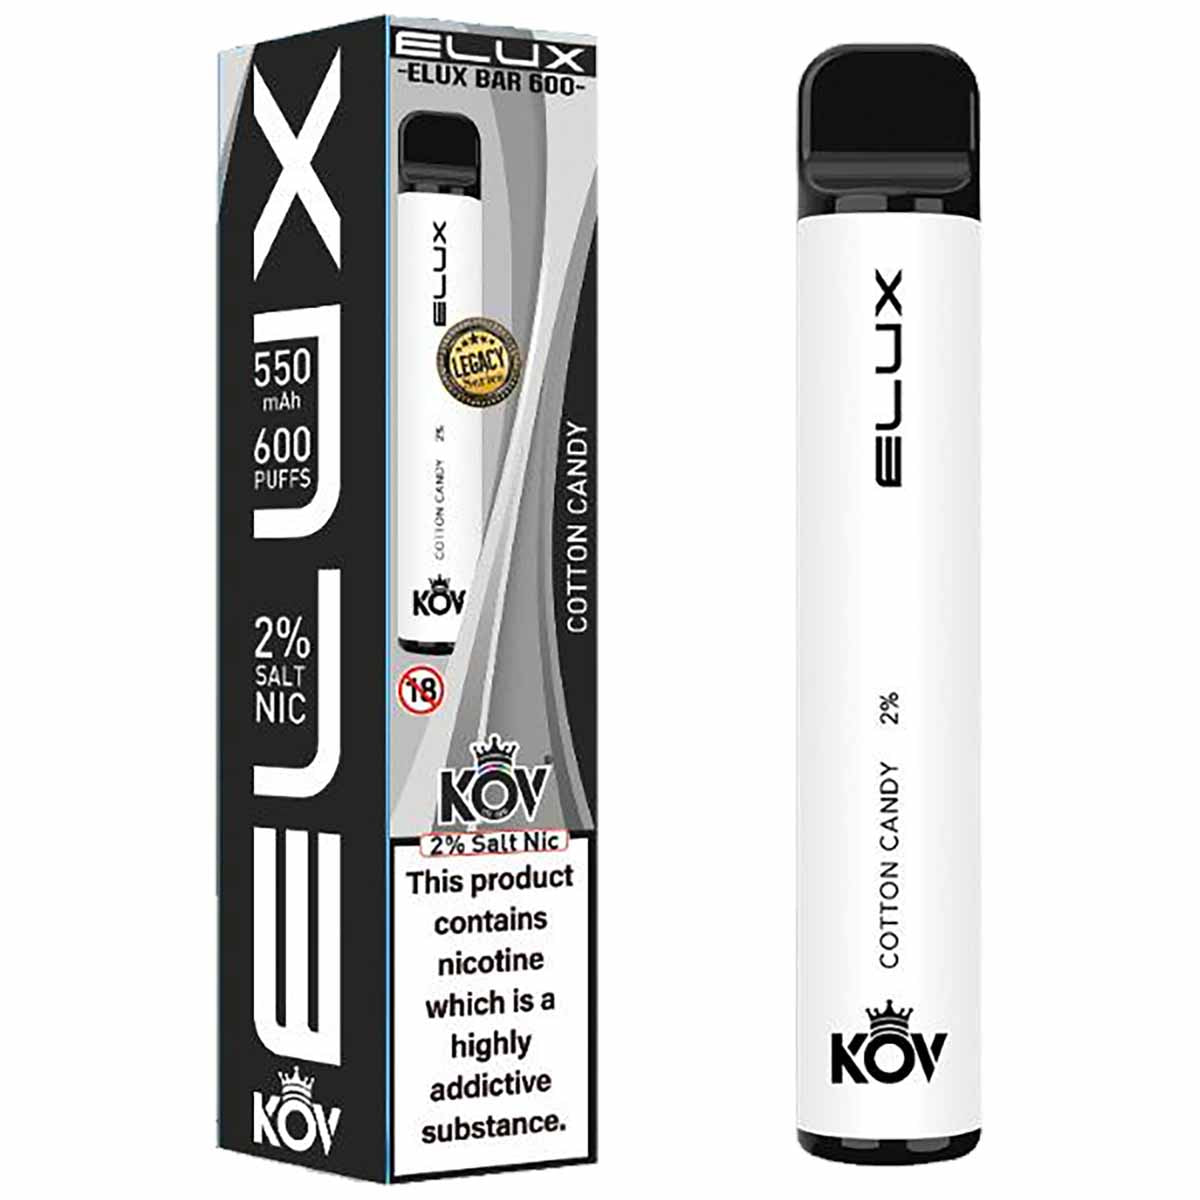 Elux Bar 600 Legacy Series Disposable Vape Device - Cotton Candy